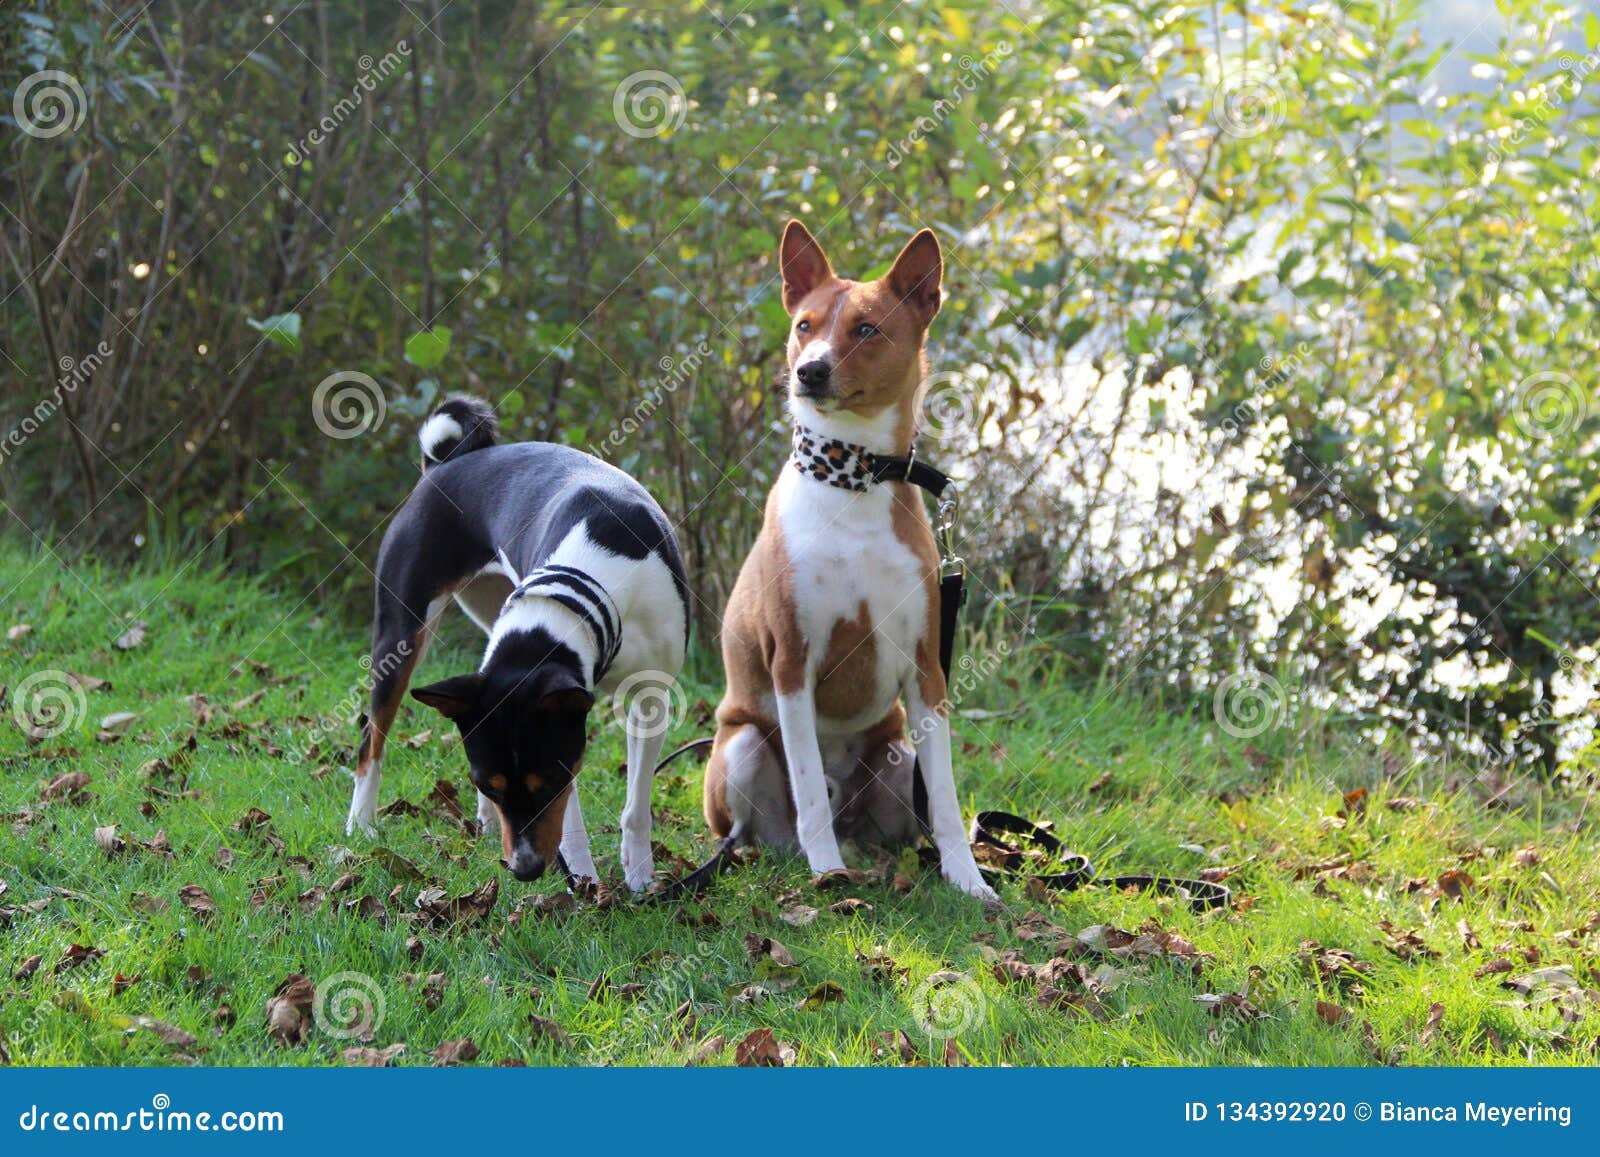 A Tri Color Basenji Next To A Sitting Two Tone Basenji In